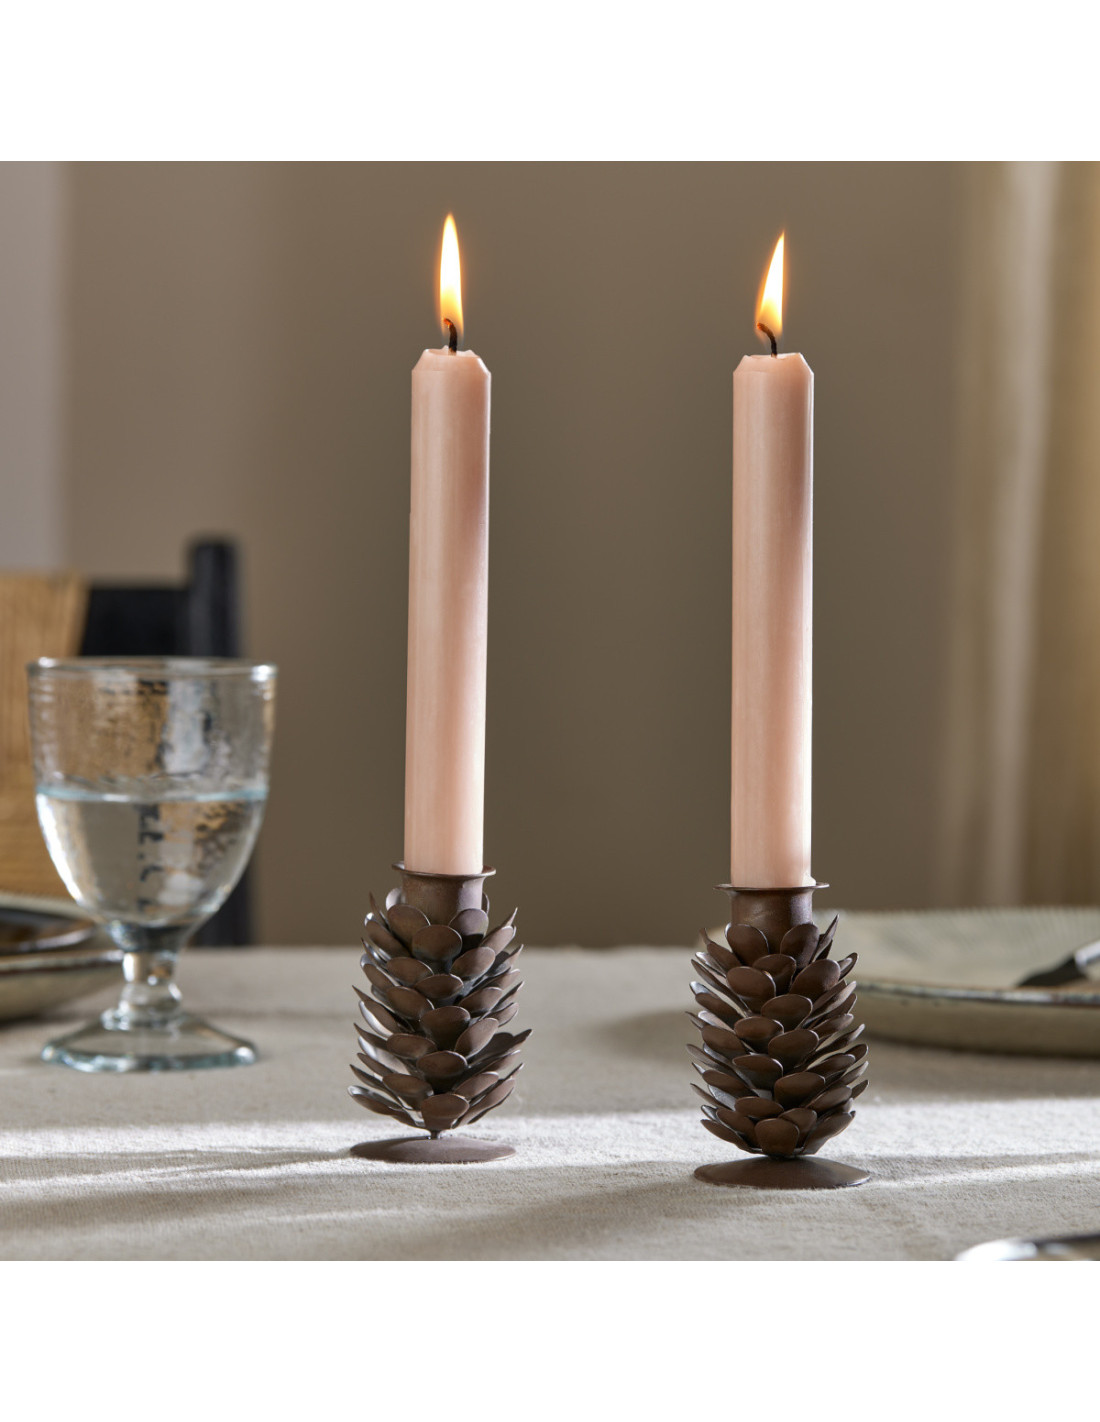  Keona Golden Pine Cone Pillar Candle Holder : Home